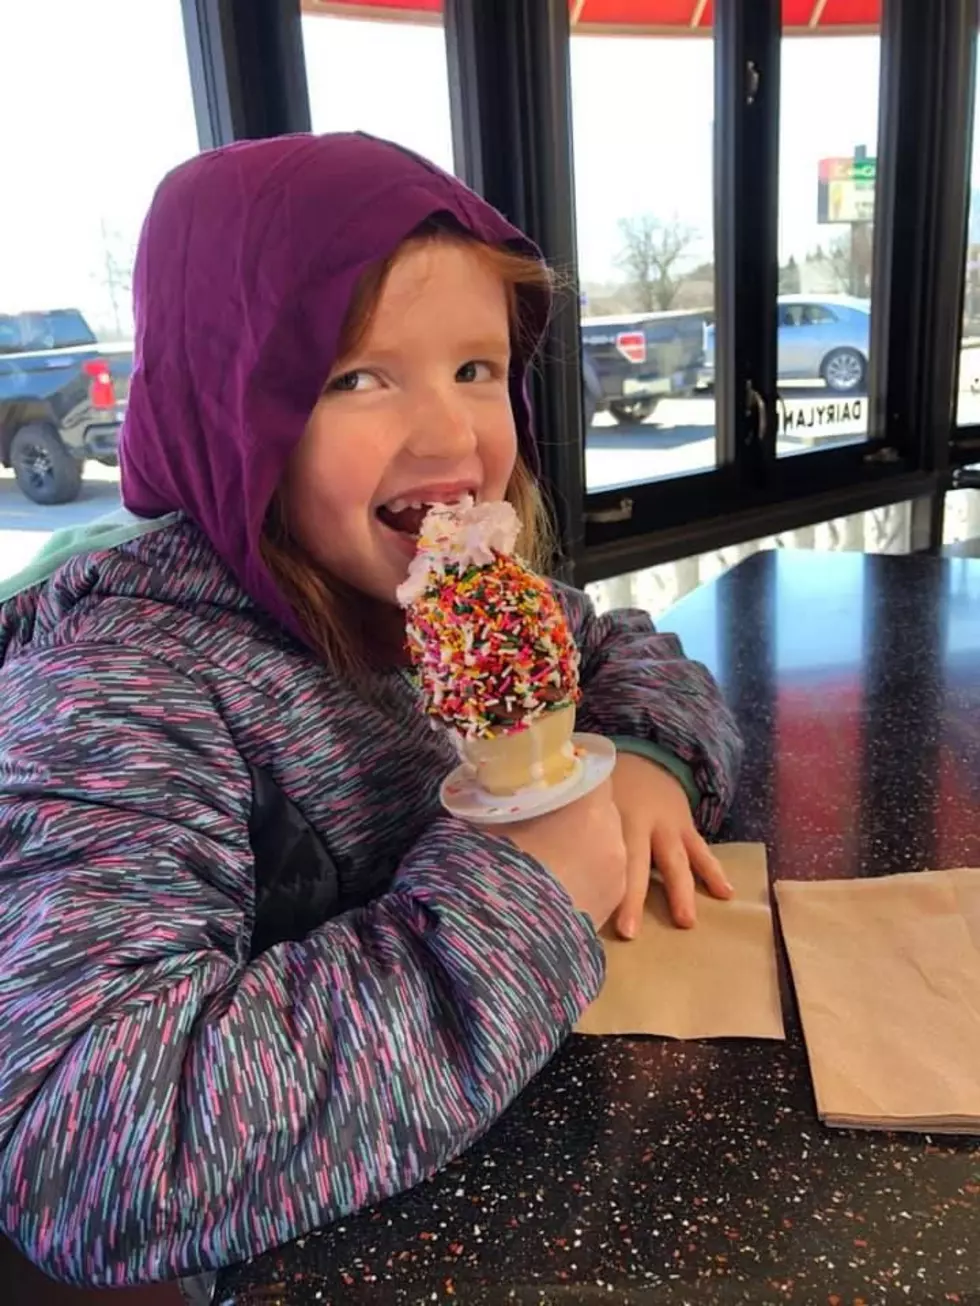 I Scream, You Scream, For These Genesee County MI Ice Cream Shops to Open